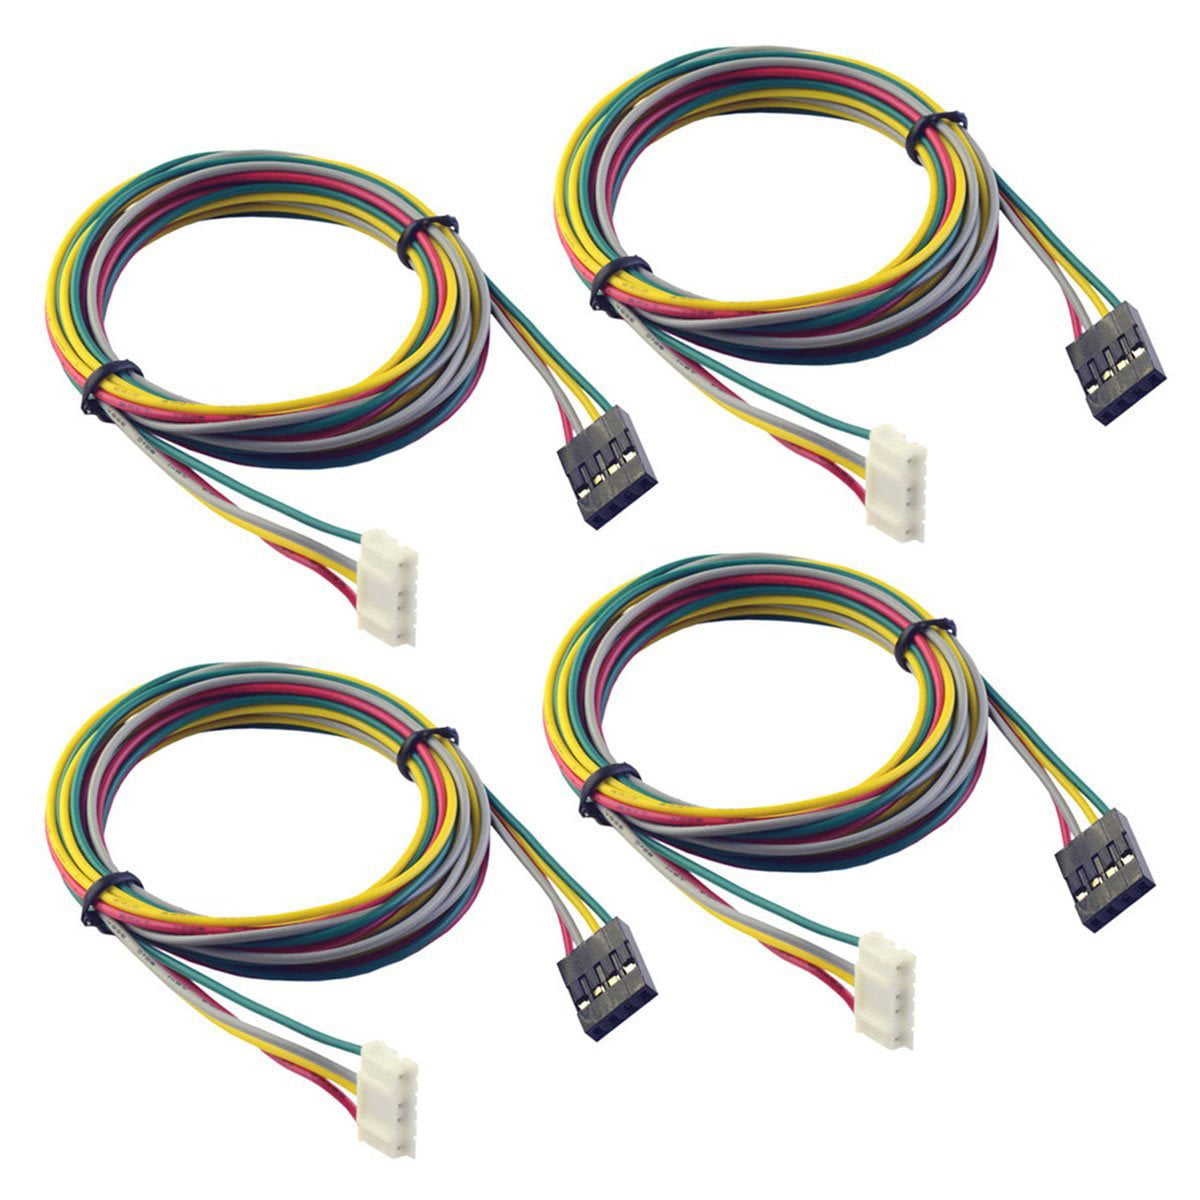 4Pcs 4-wire Stepper Motor Cable for Nema17 to Control Board 4 Pin to 6 Pin 